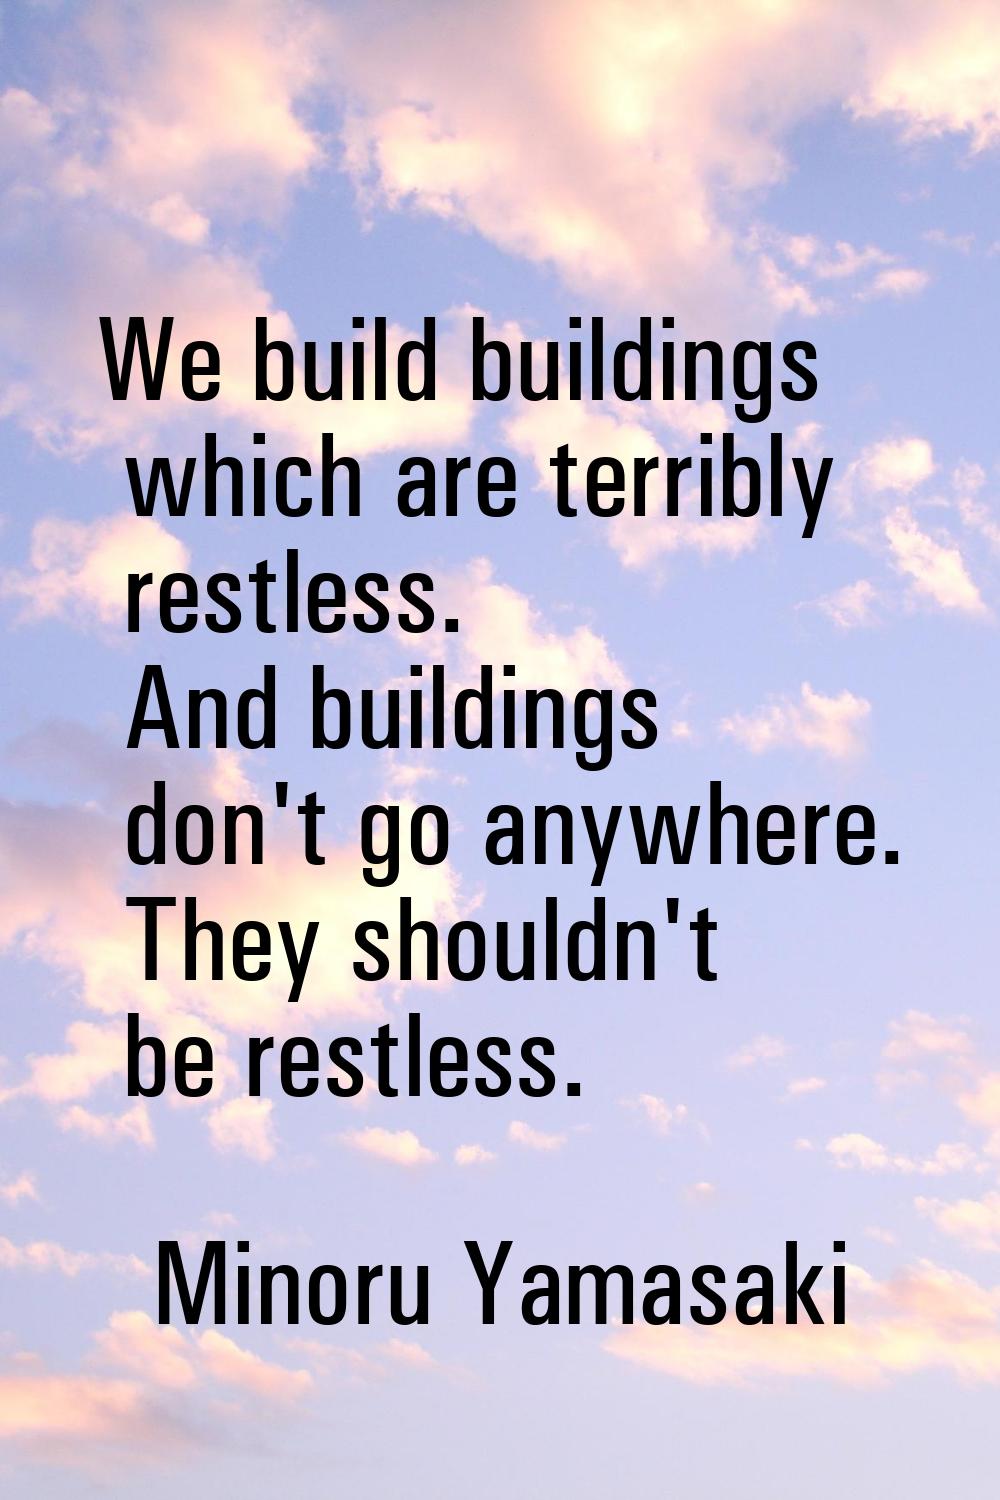 We build buildings which are terribly restless. And buildings don't go anywhere. They shouldn't be 